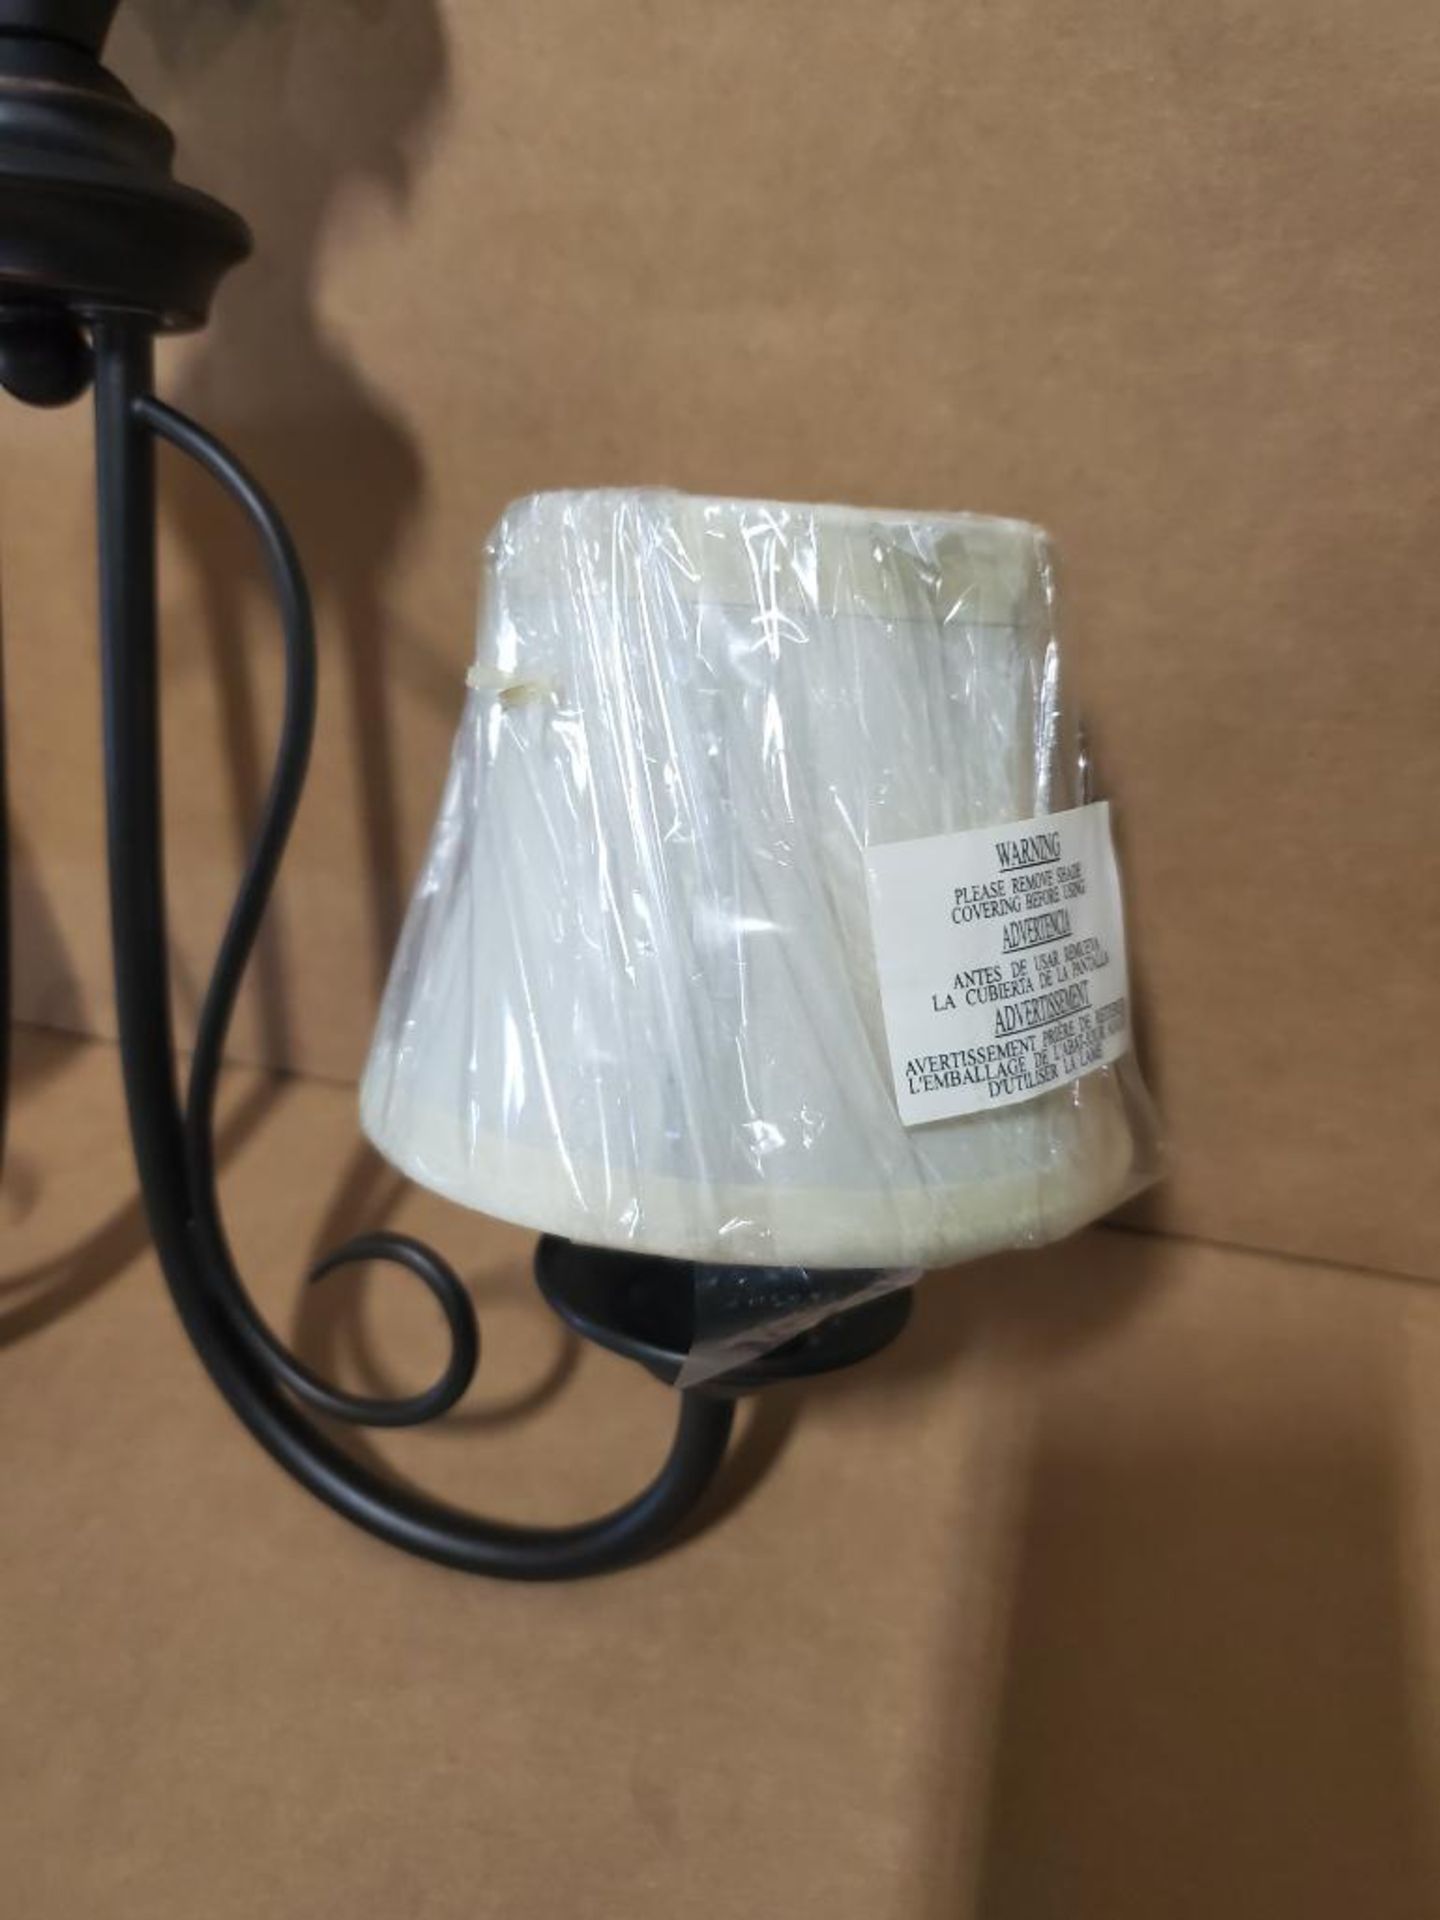 Qty 159 - SunLink 12 volt 2-light chandelier w/ shade. Part # RV-181302-744. New in bulk box. - Image 3 of 9